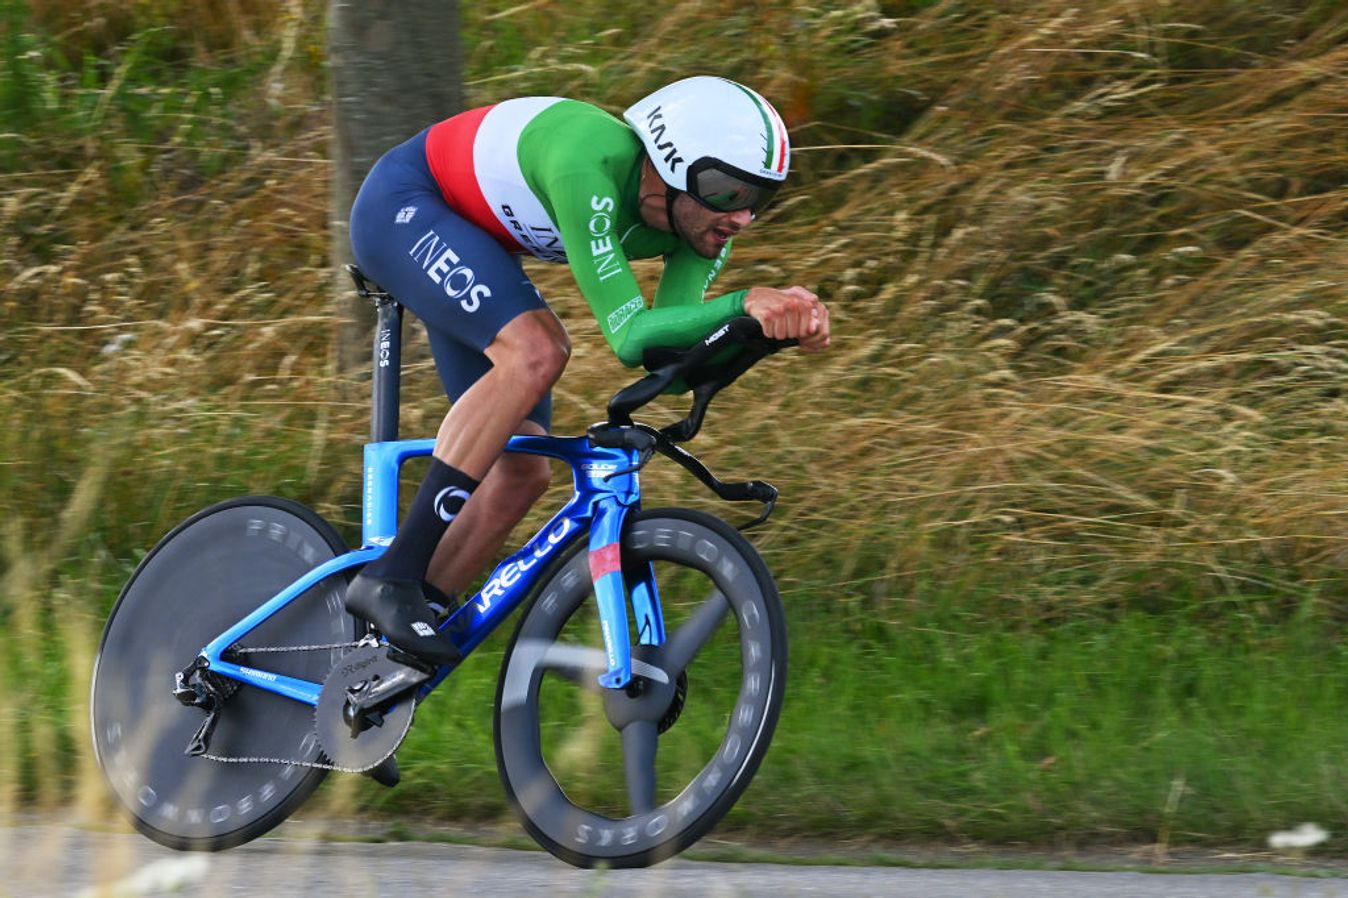 Filippo Ganna en route to victory in the Tour de Wallonie time trial